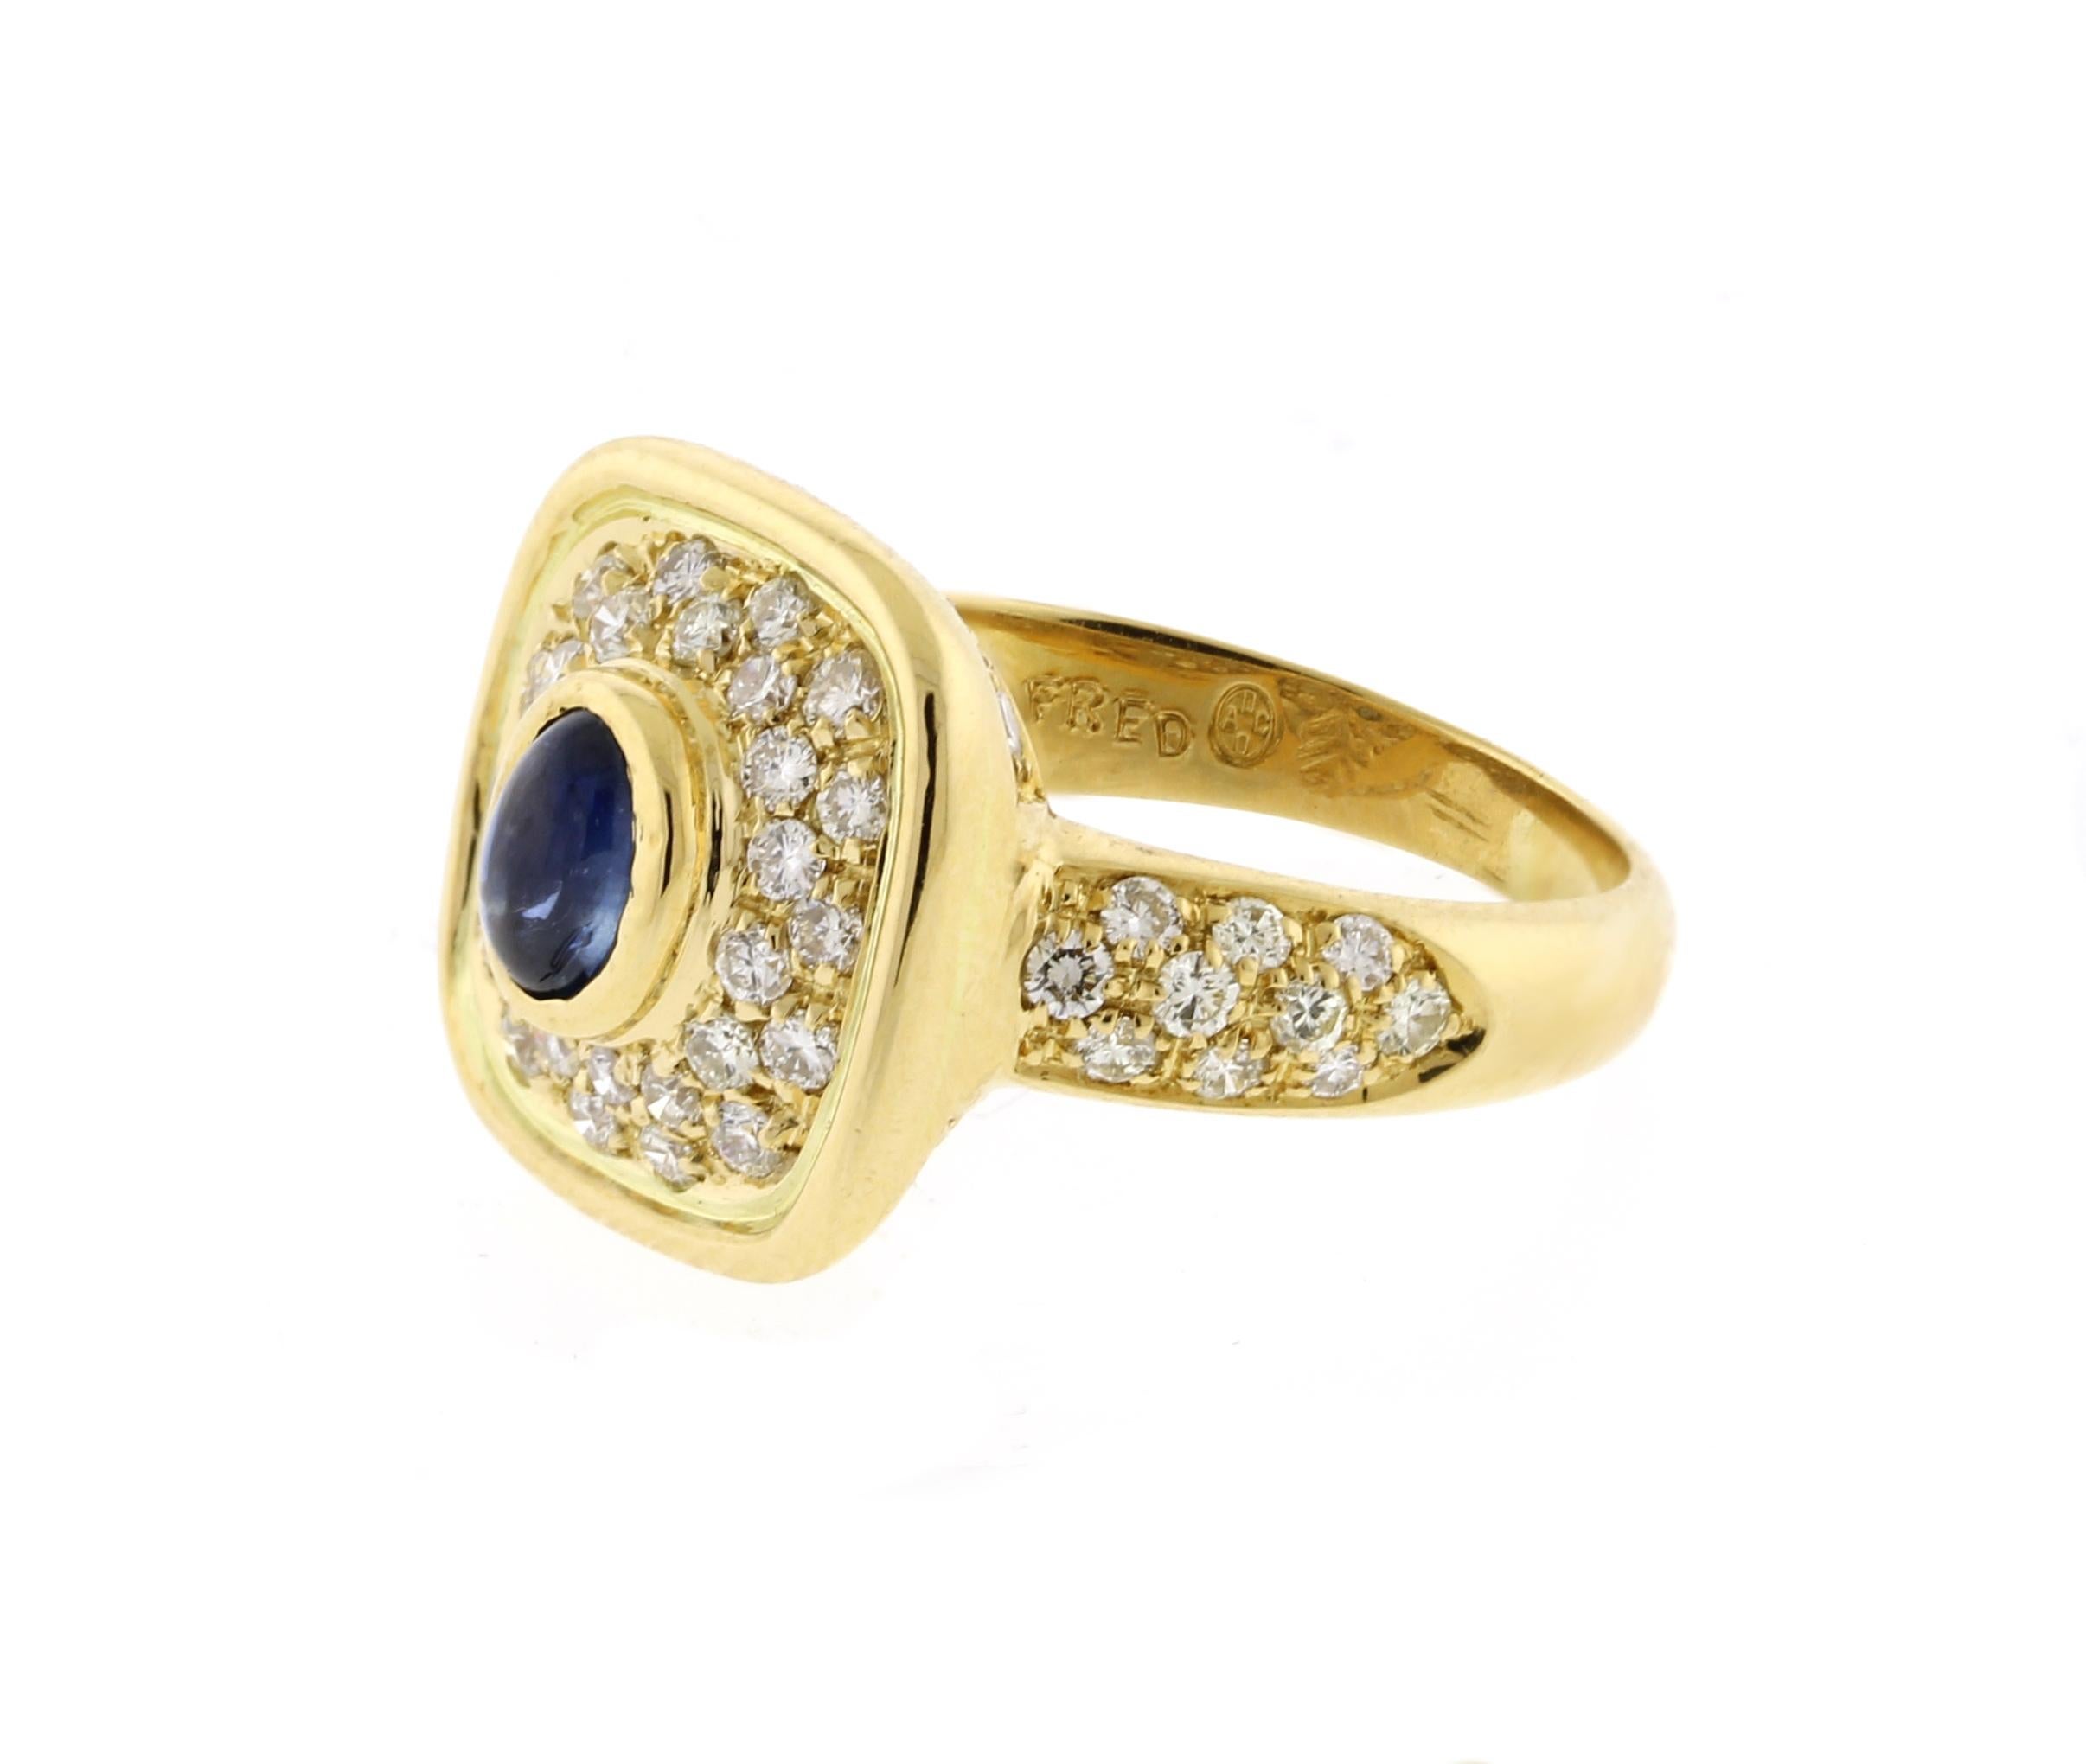 From Fred of Paris, a cabochon sapphire and diamond gold ring.
• Designer: Fred of Paris
• Metal: 18 karat yellow gold
• Circa:  late 20th century
• Size: 6 1/2 can be resized
• Diamond: 60 pave diamonds 1.55 carats
• Gemstone: Cabochon sapphire 1